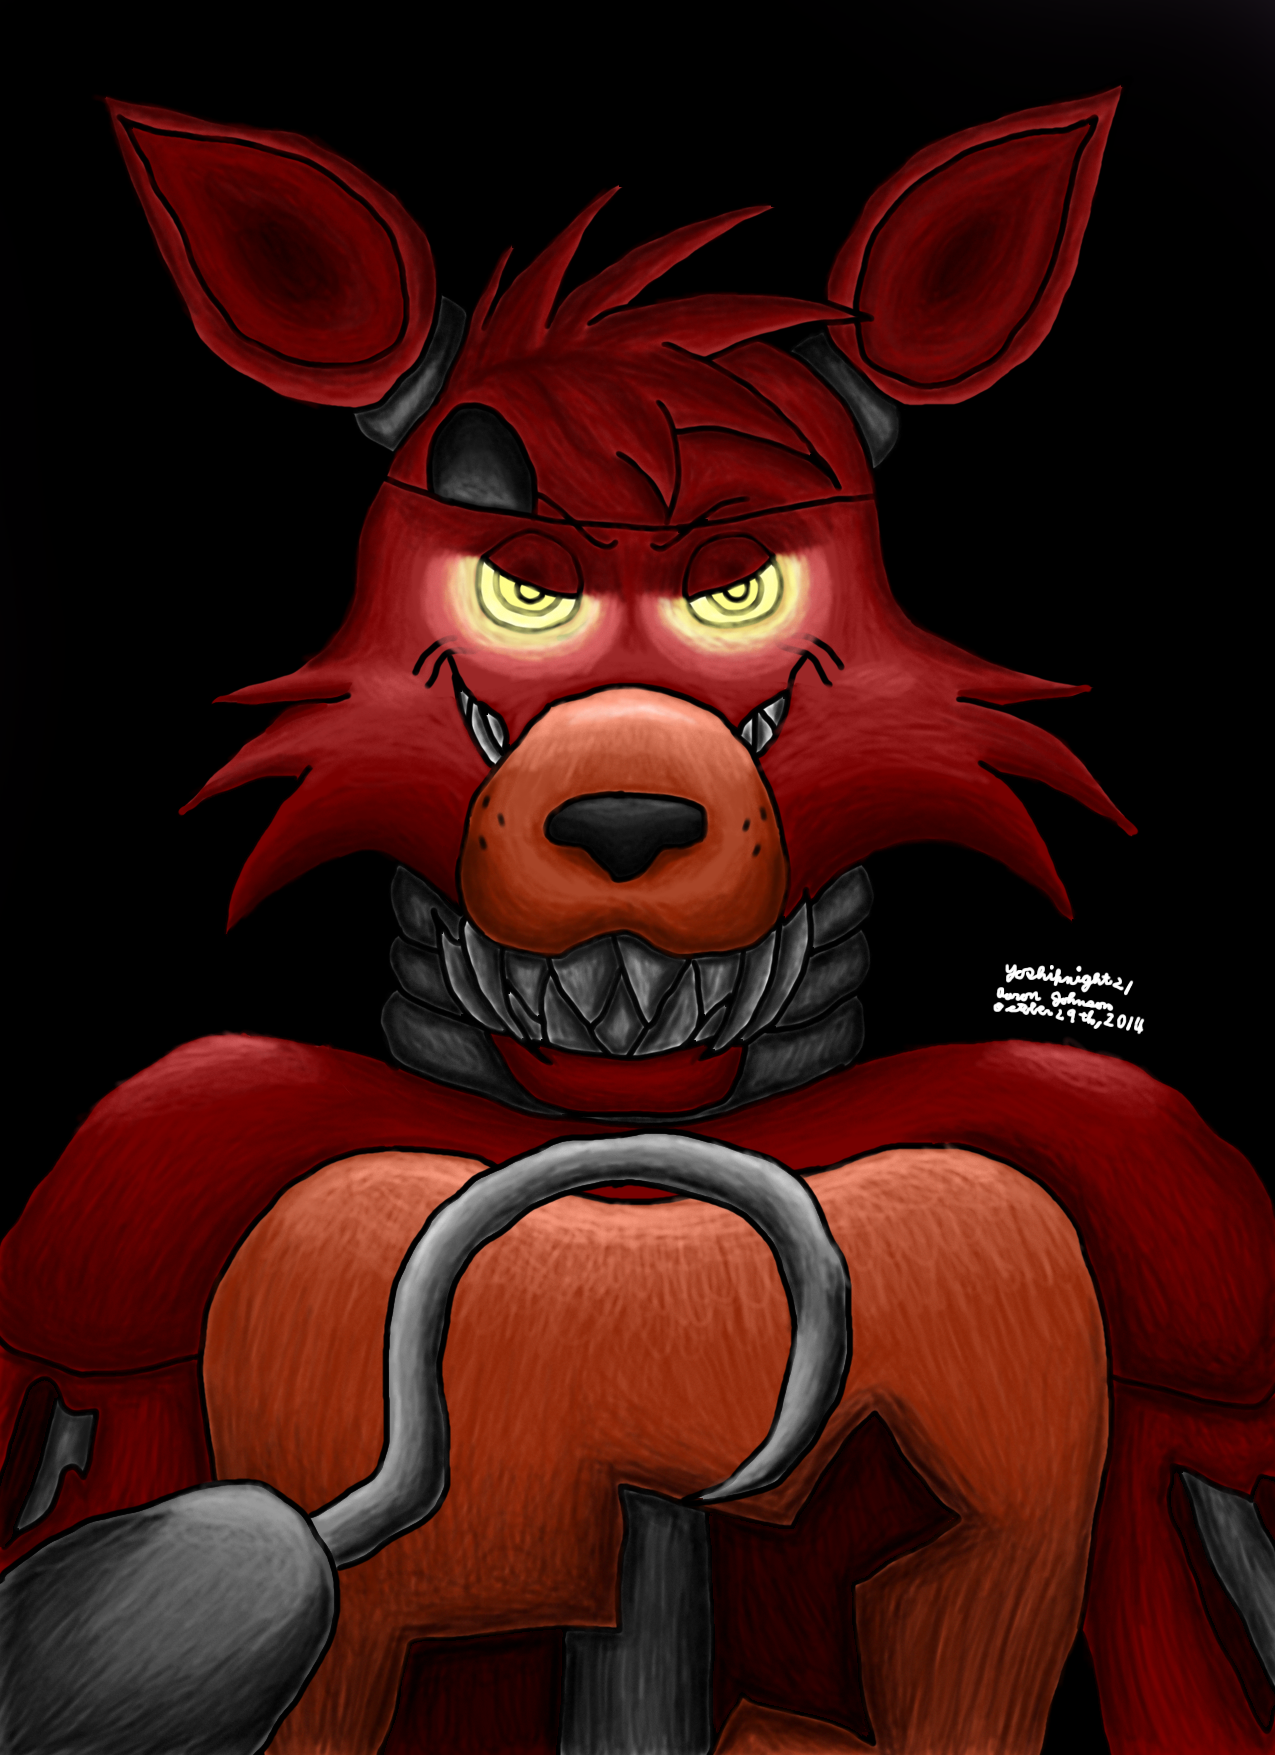 Night фокси. Фокси ФНАФ. Five Nights Фокси. Фокси ФНАФ 1. Five Nights at Freddy's Foxy.